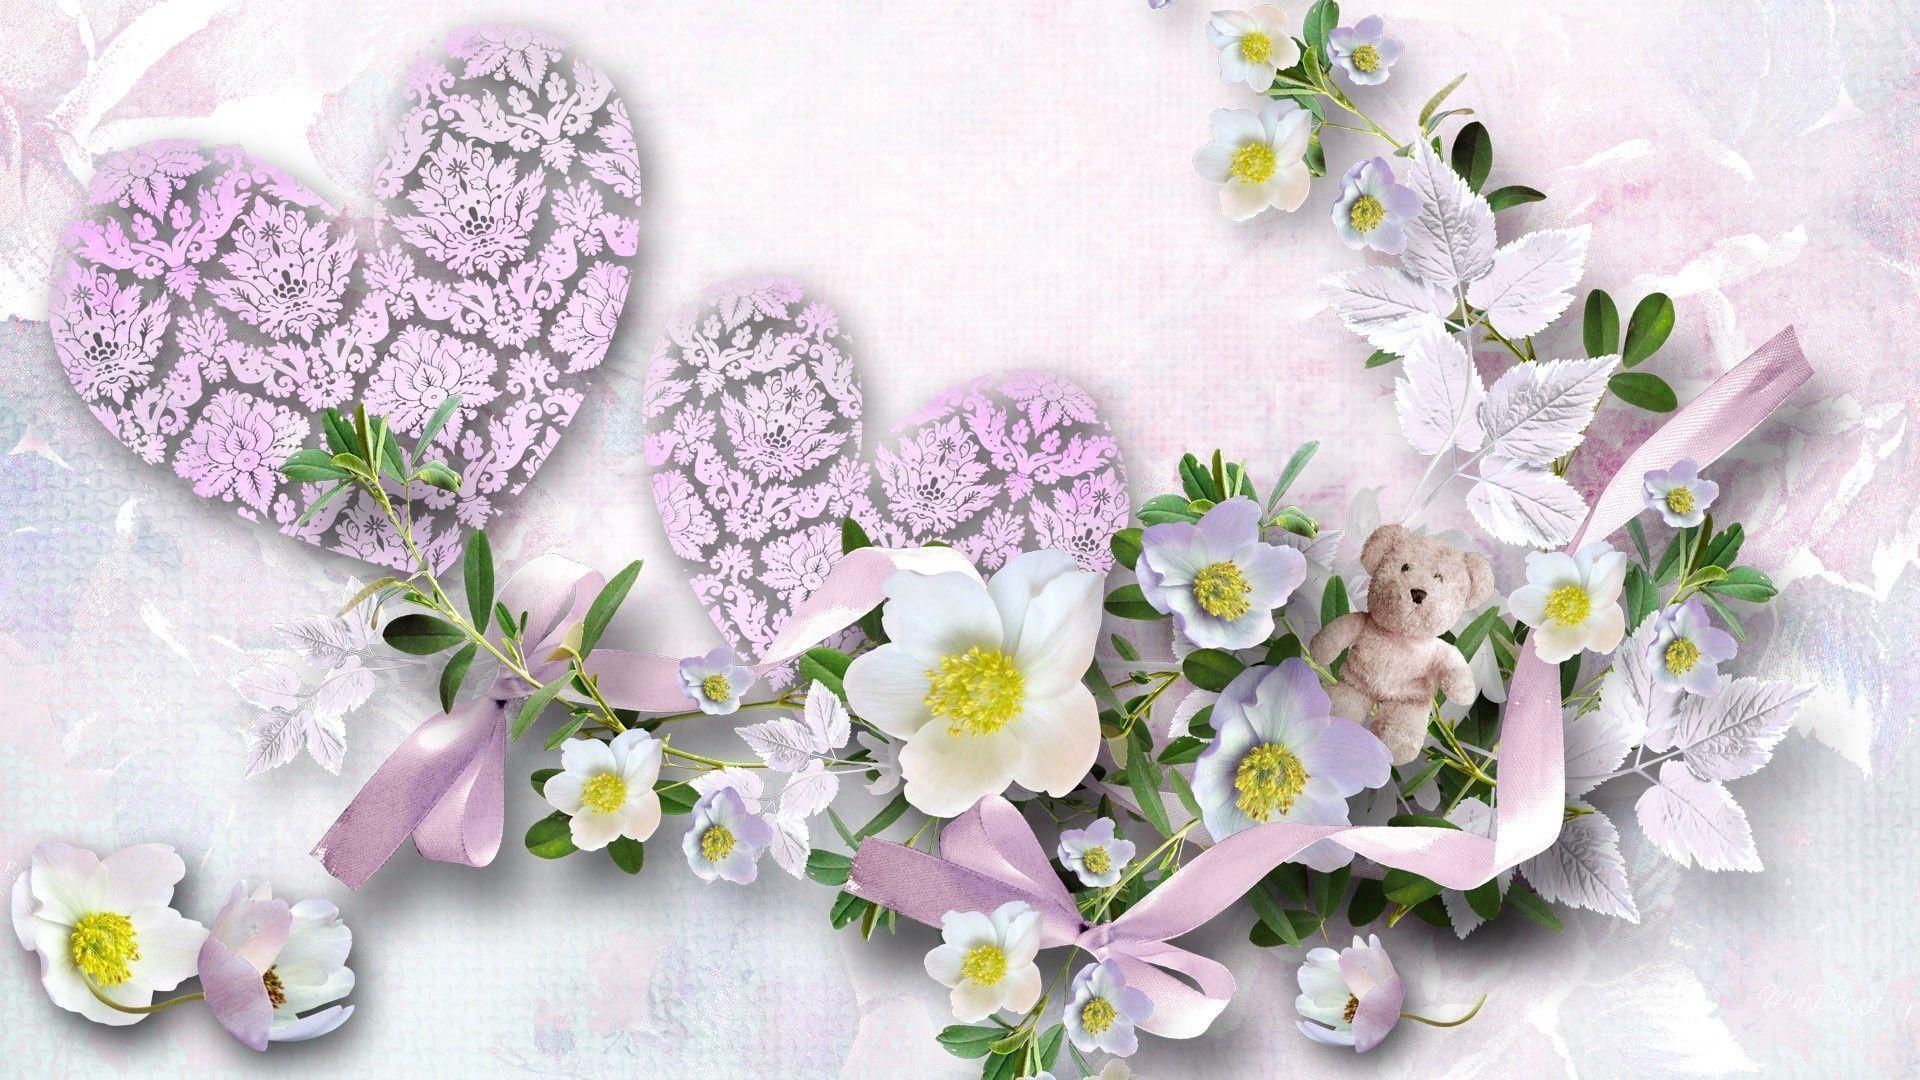 Flowers and hearts wallpaper 1920x1080 px